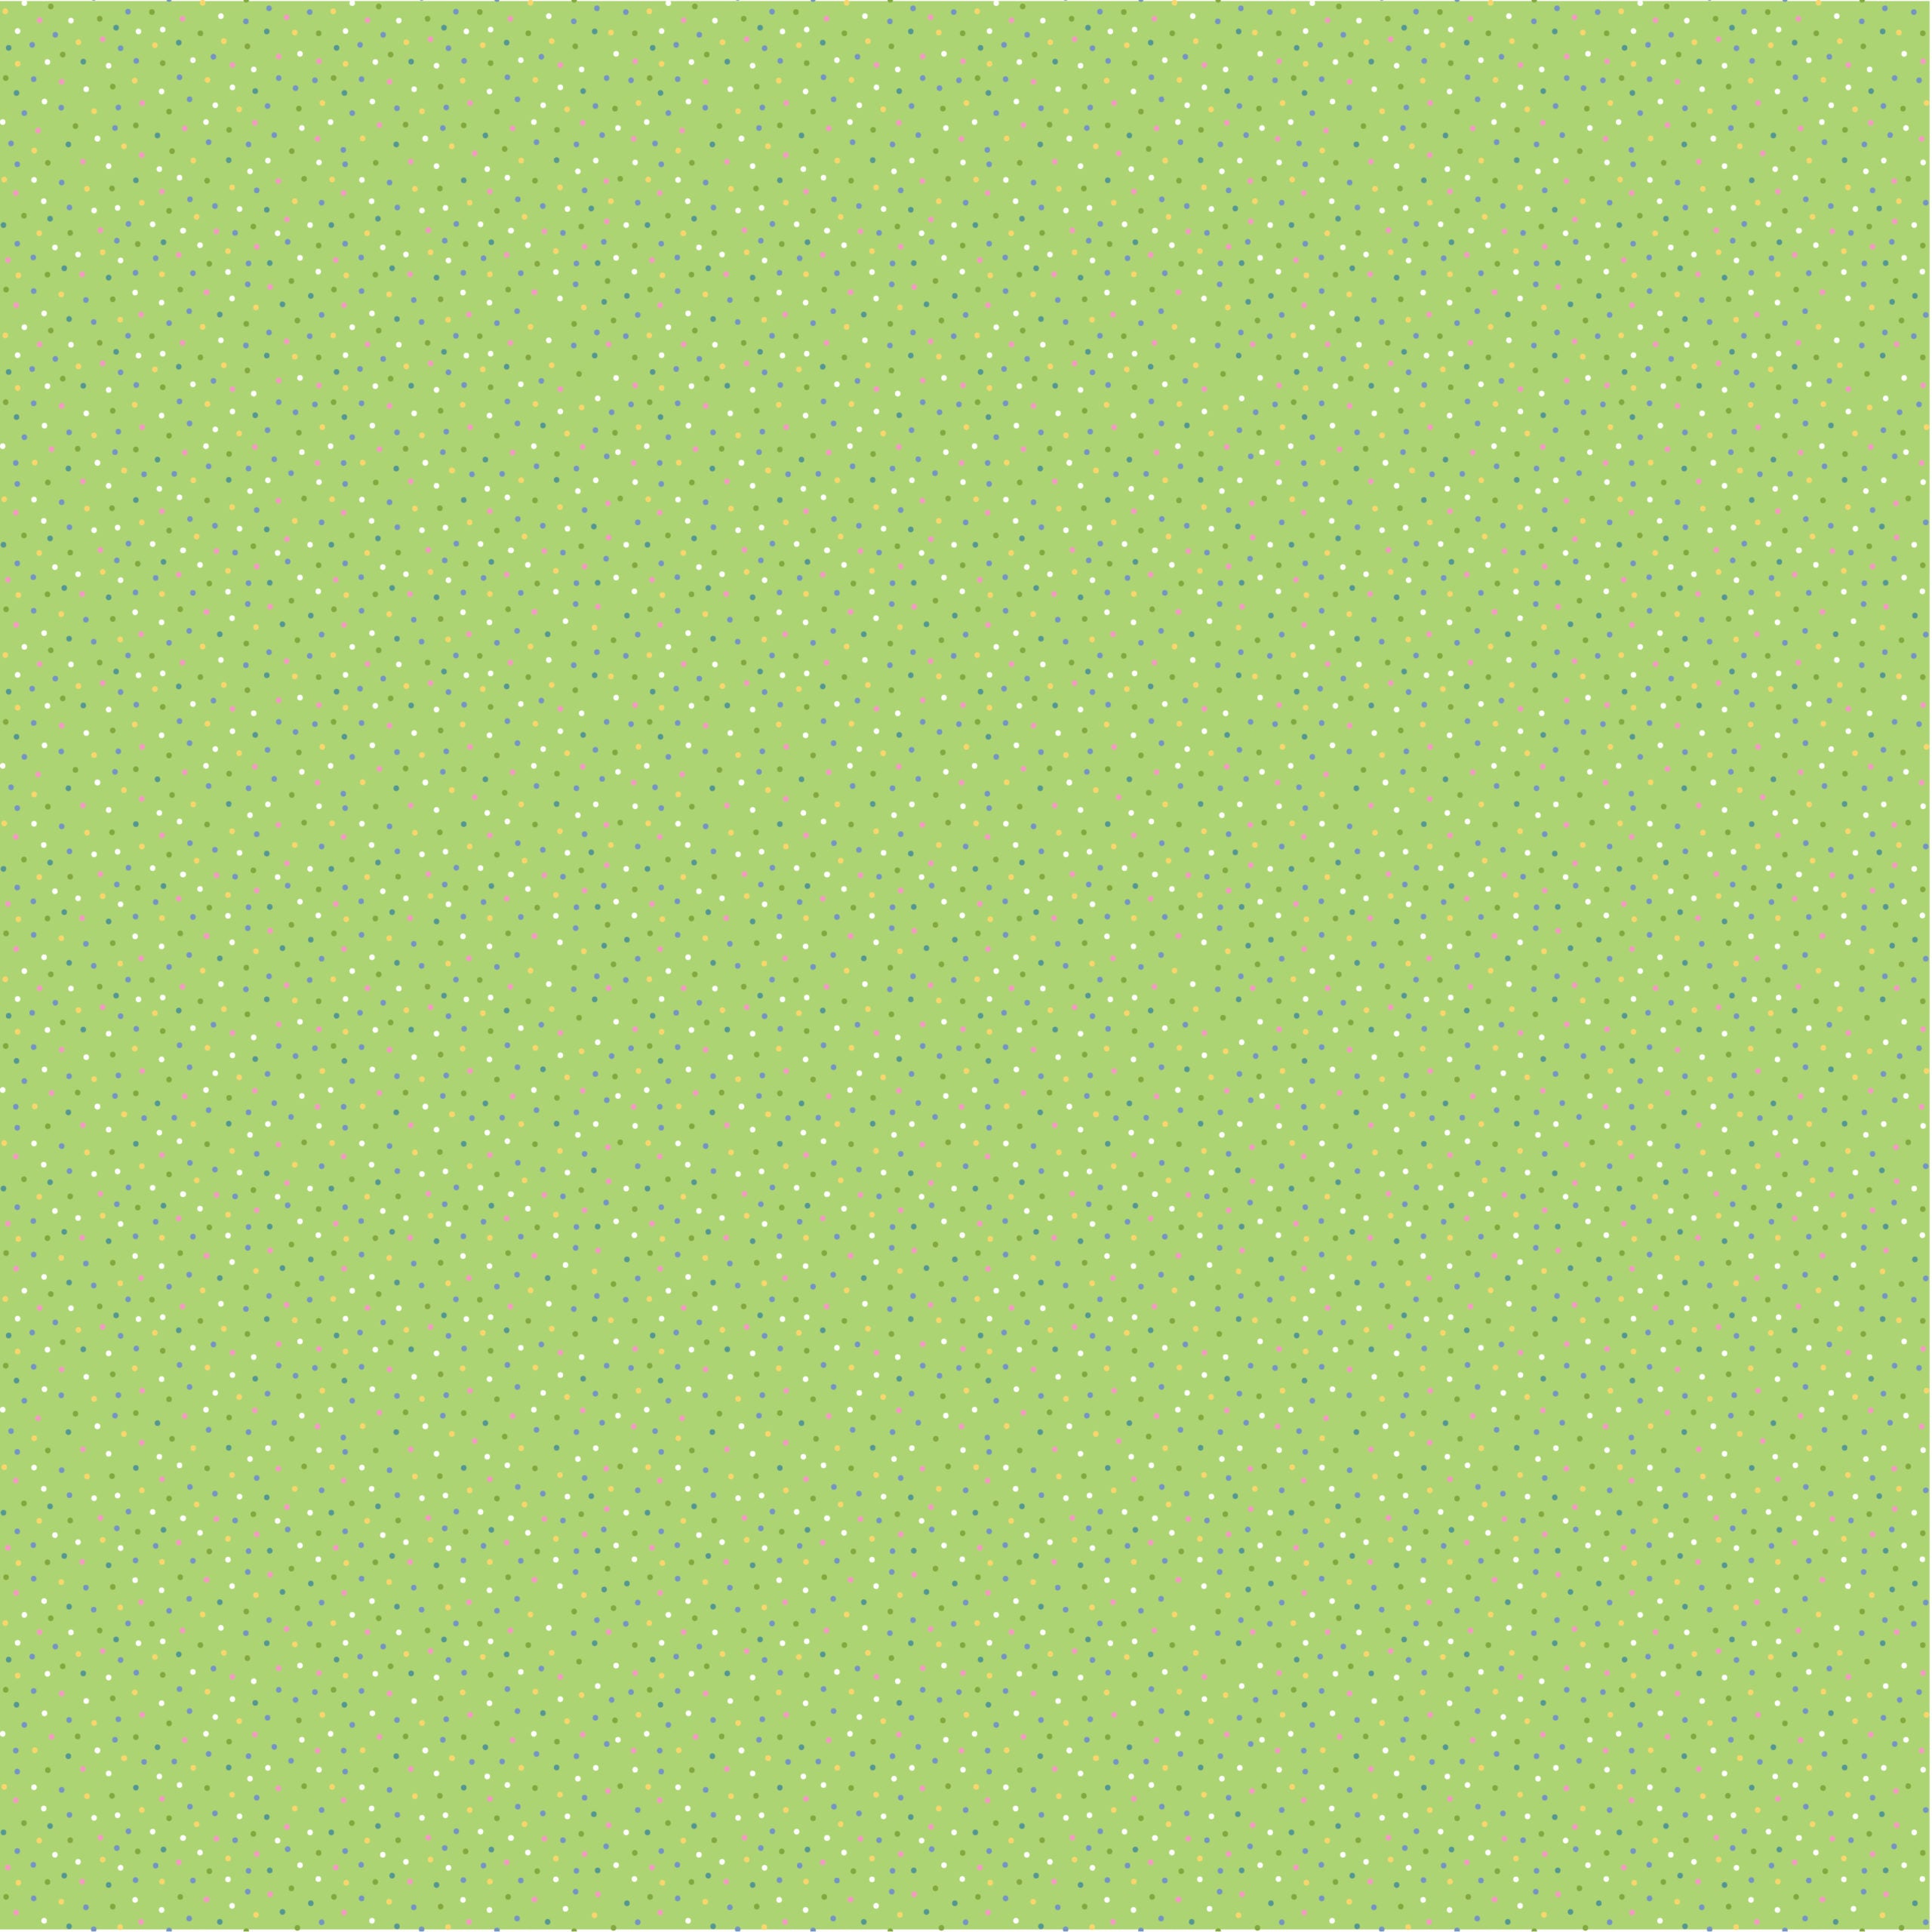 Country Confetti Sweet Pickle Bright Green Yardage by Lori Woods for Poppie Cotton Fabrics